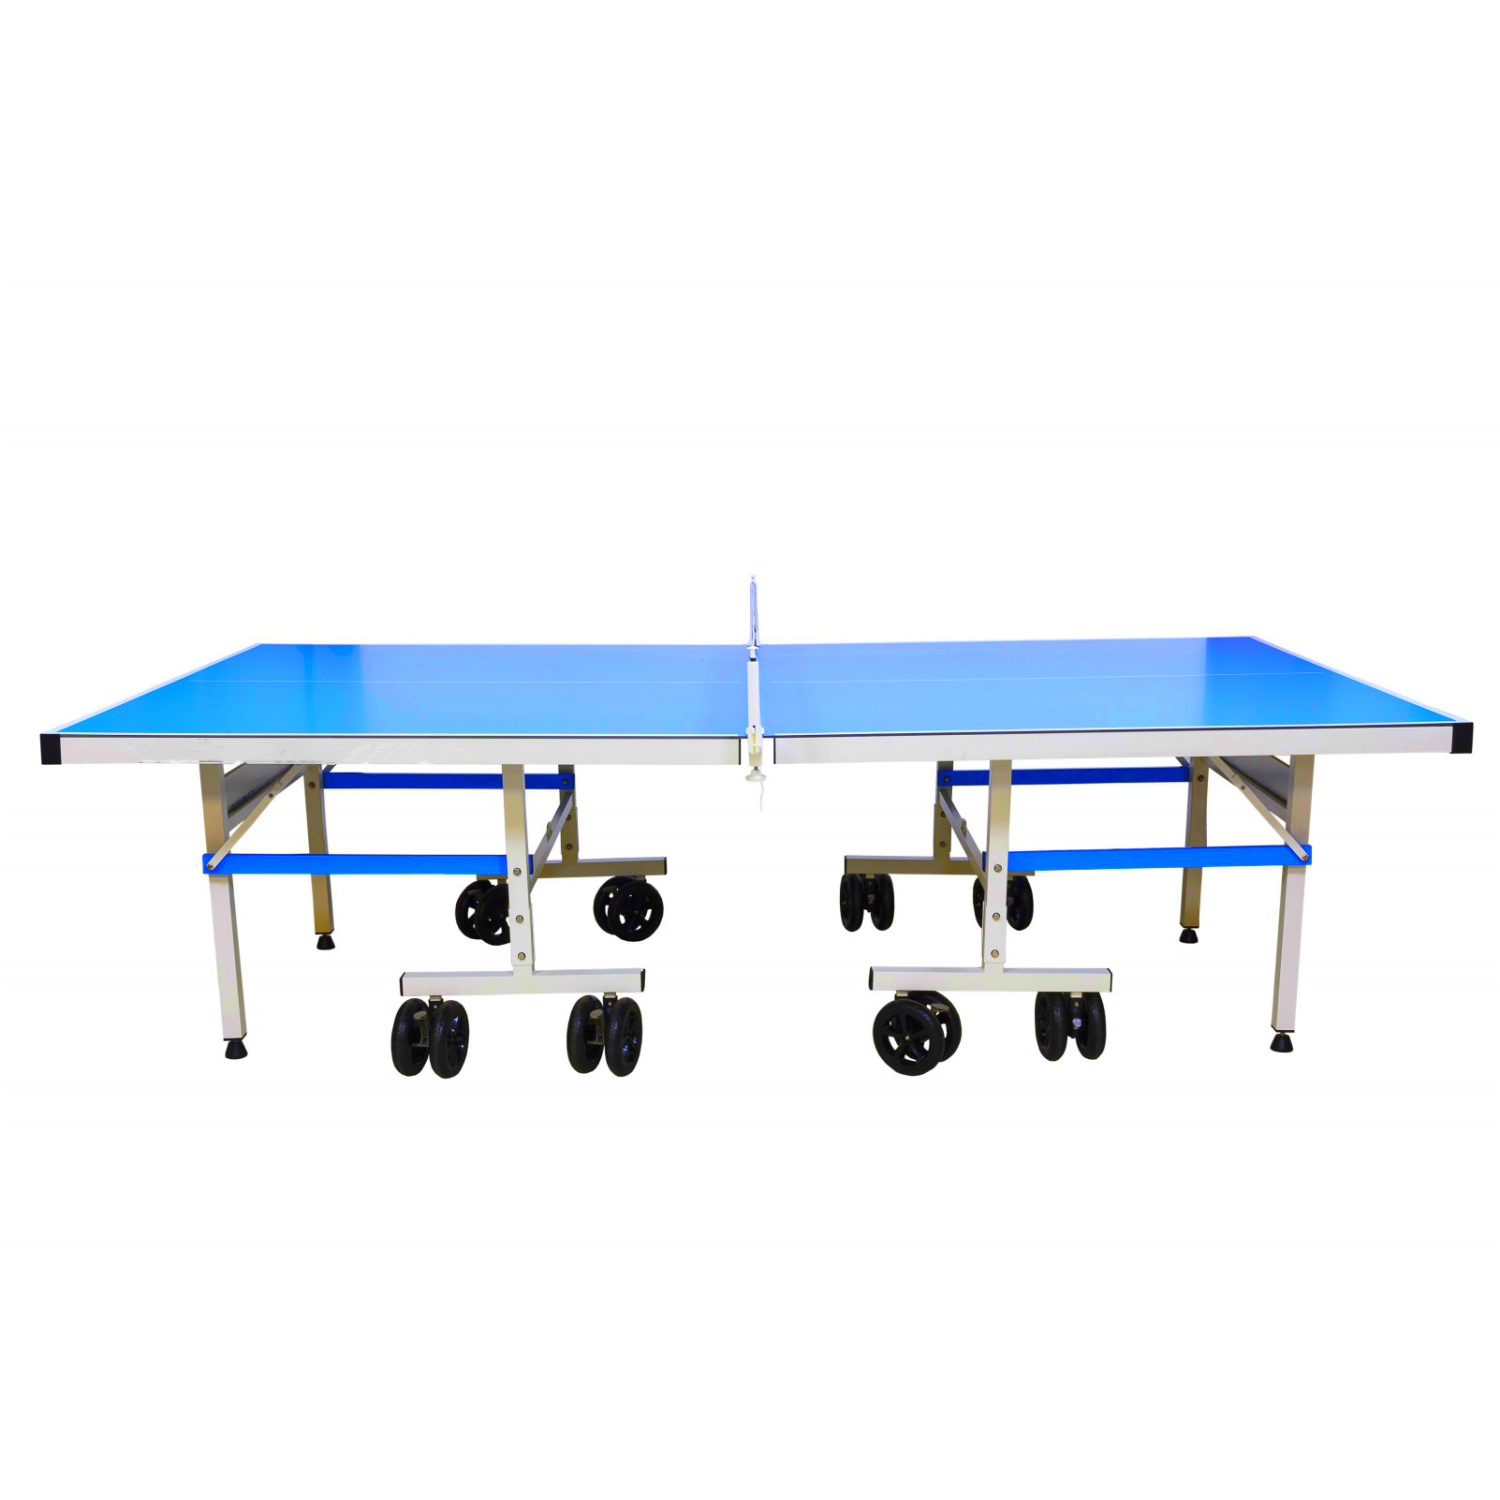 Outdoor Elite PRO Table Tennis Table-All Weather Table